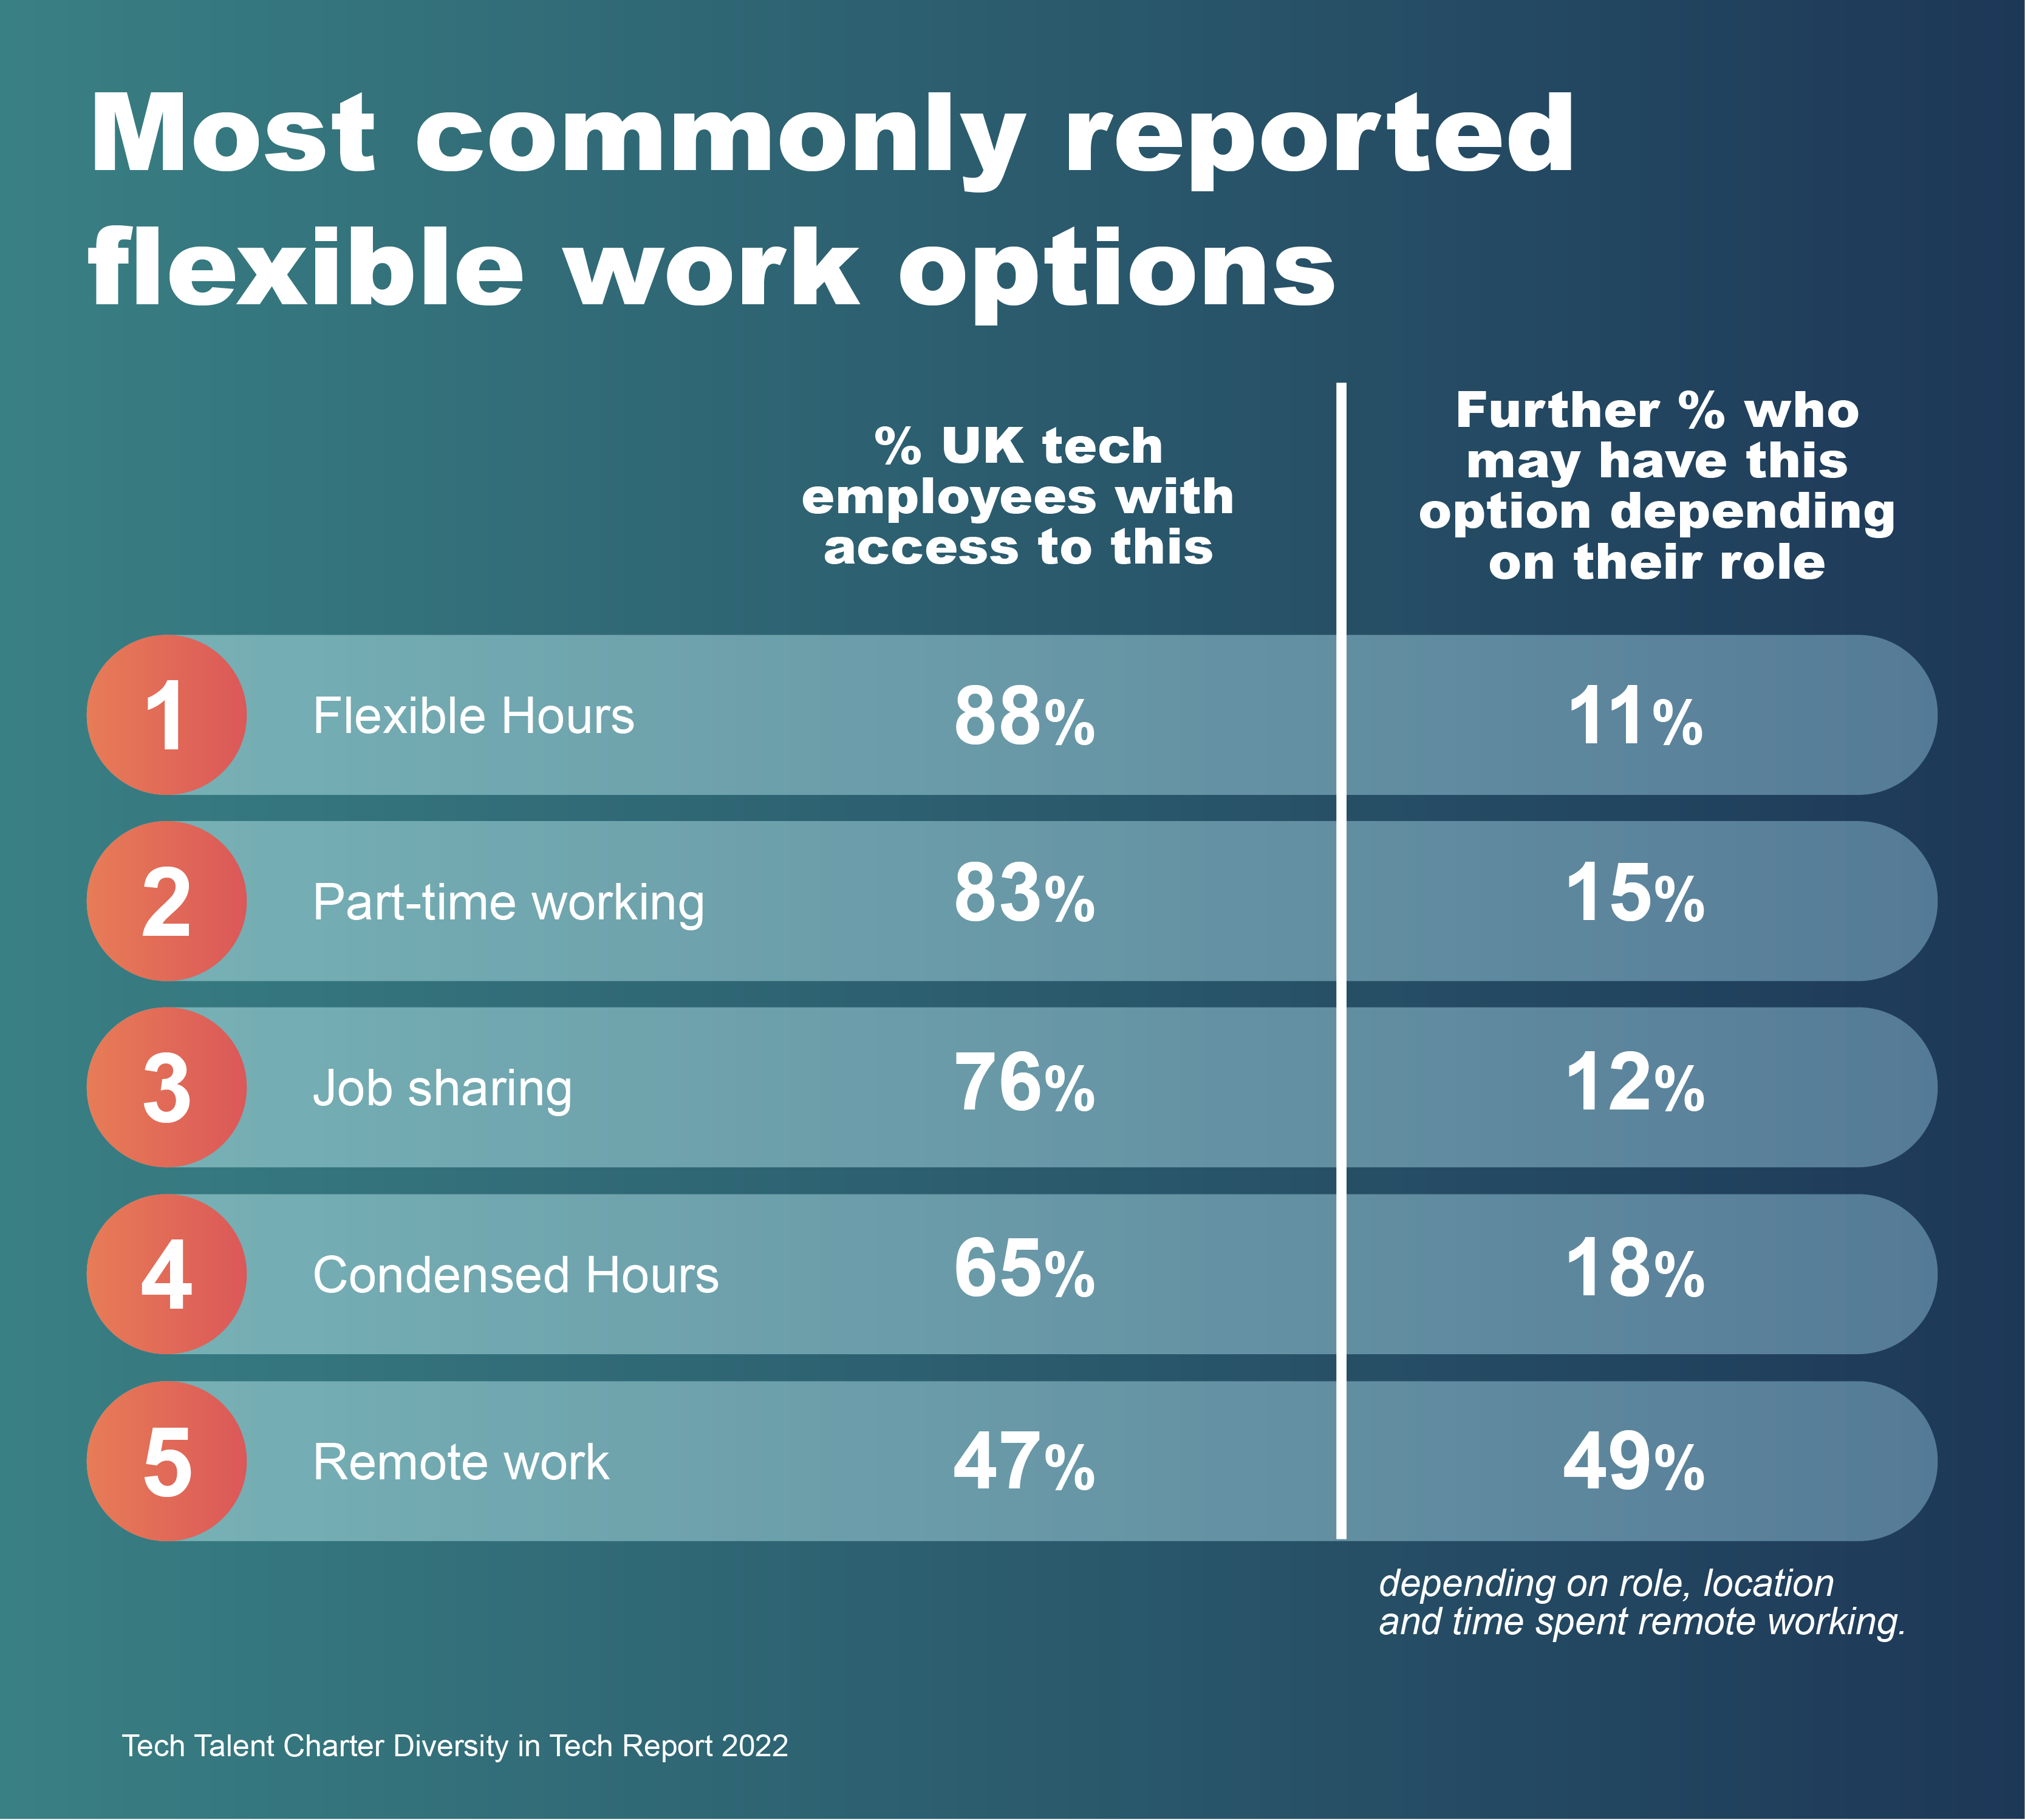 A graphics showing the most commonly reported flexible work options.